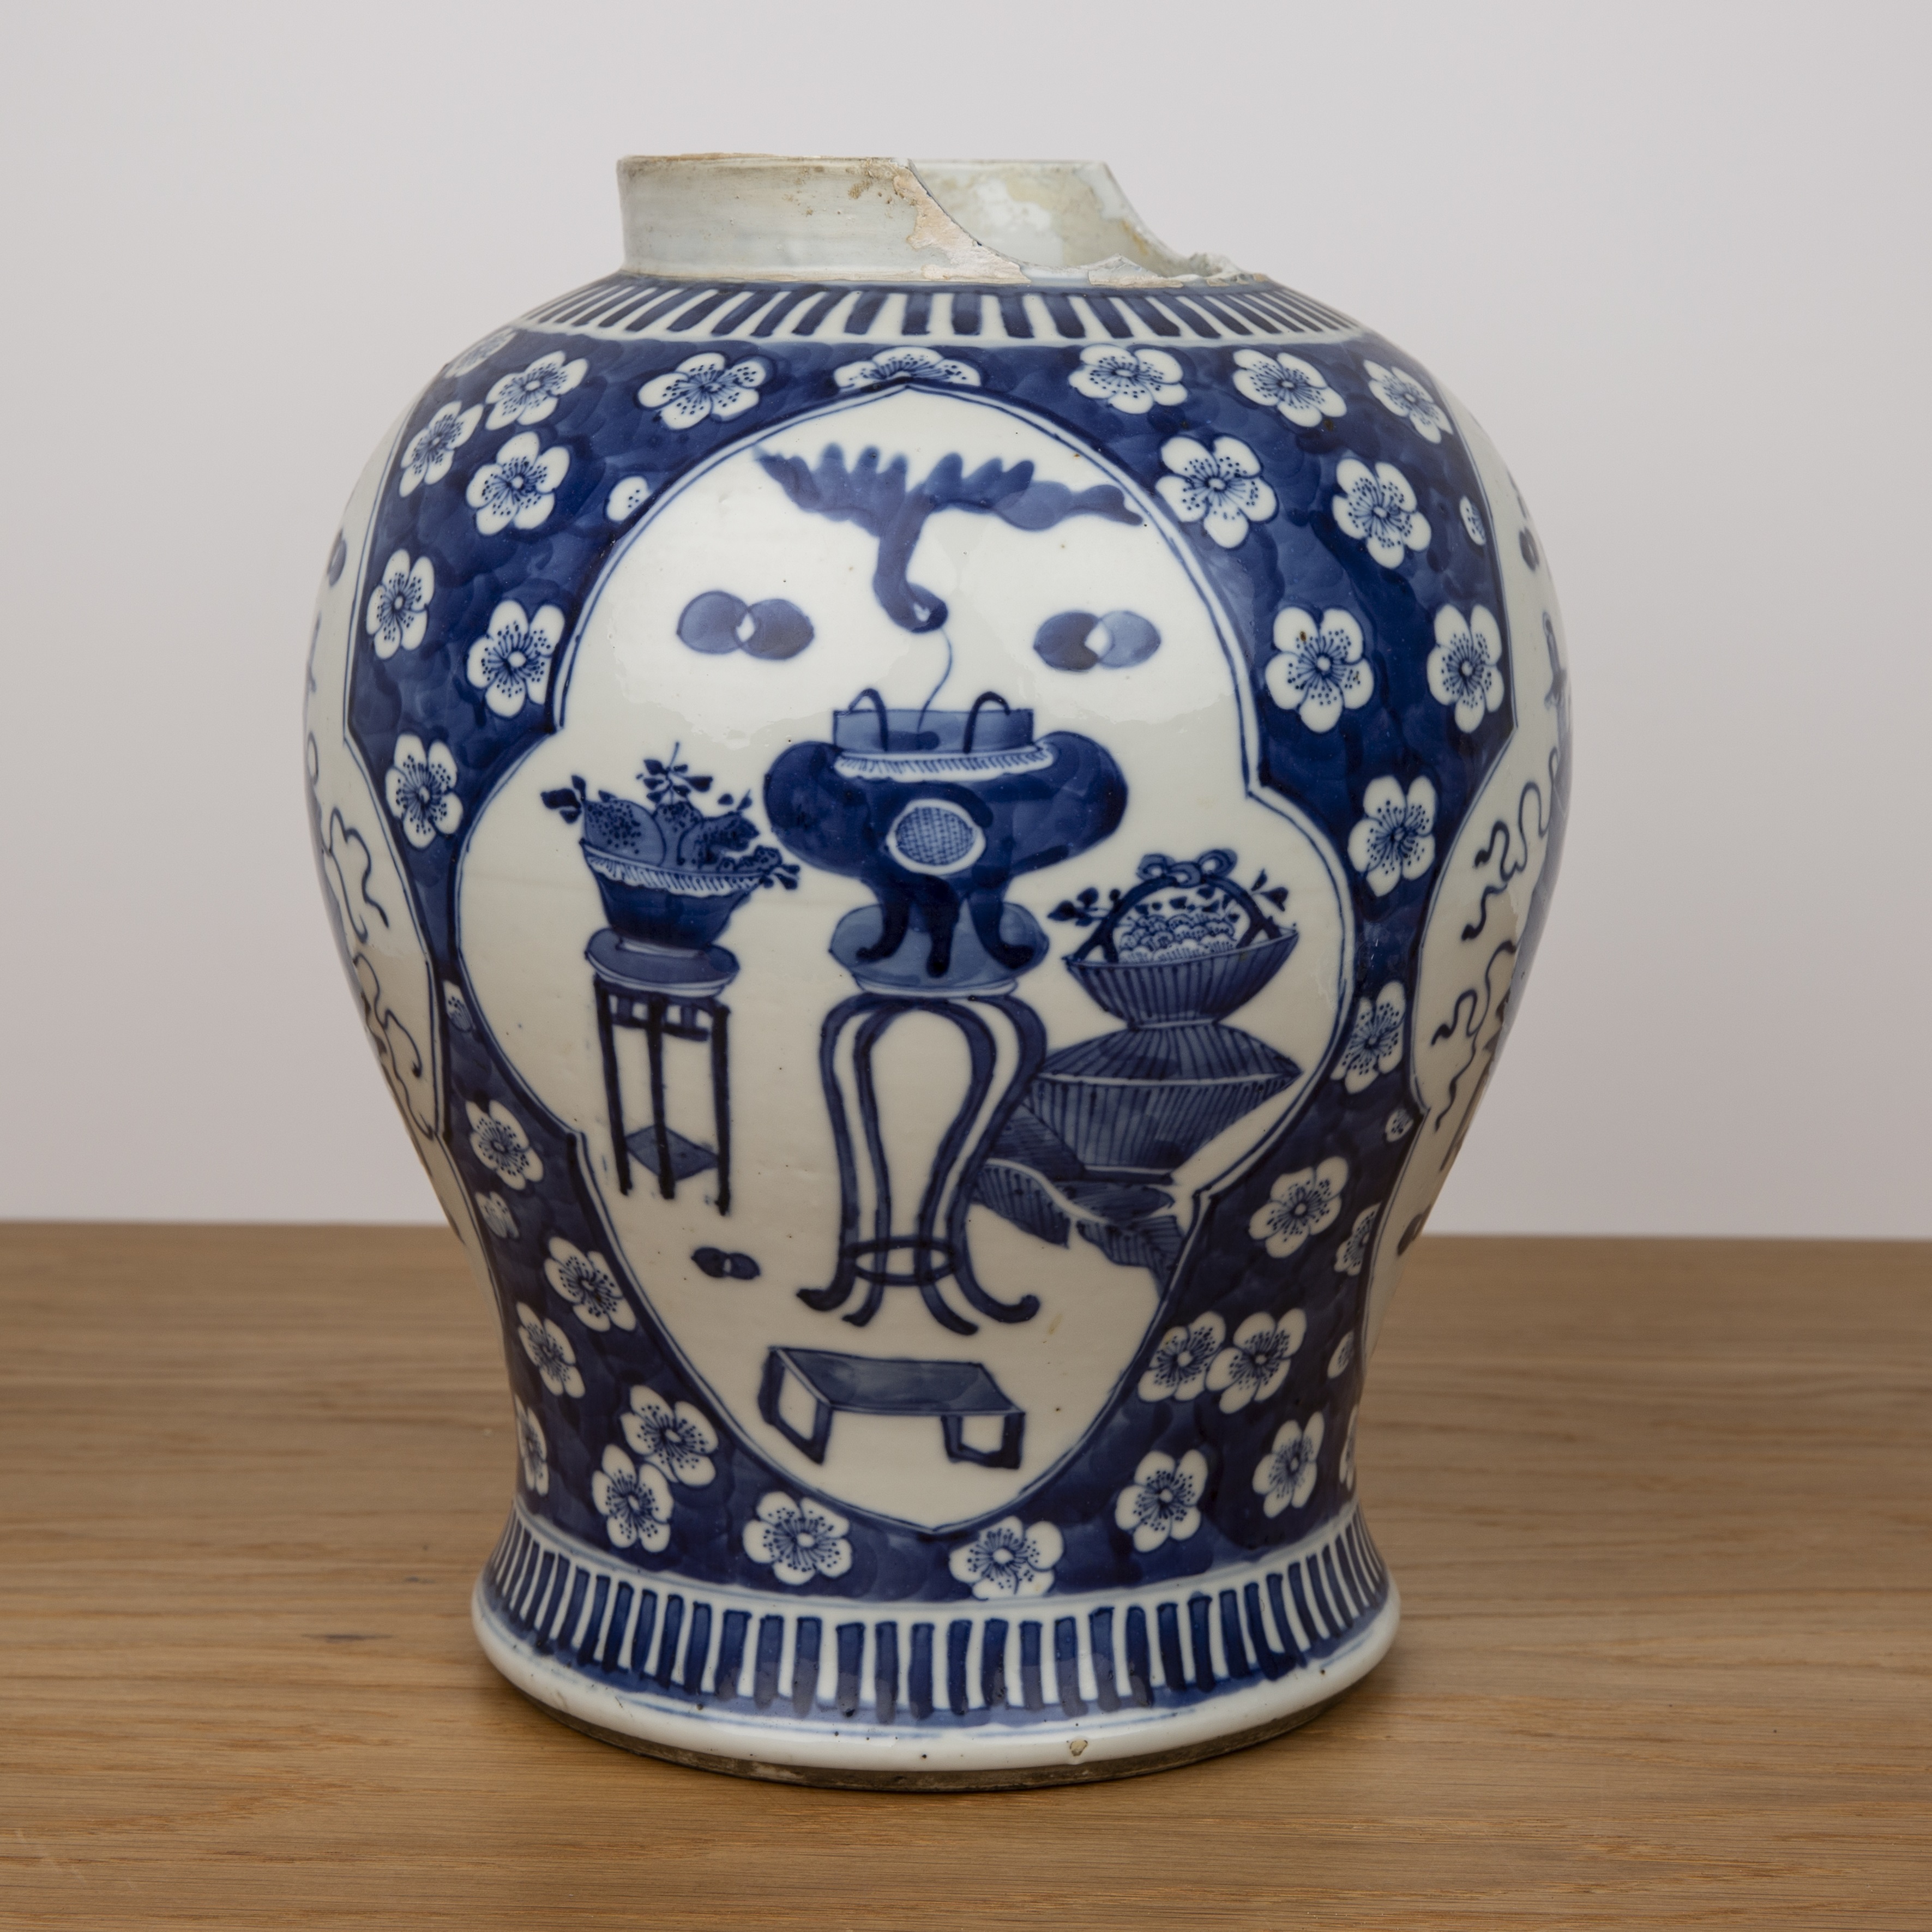 Blue and white porcelain vase and cover Chinese, 19th Century painted with panels of 'antiques' - Image 5 of 7